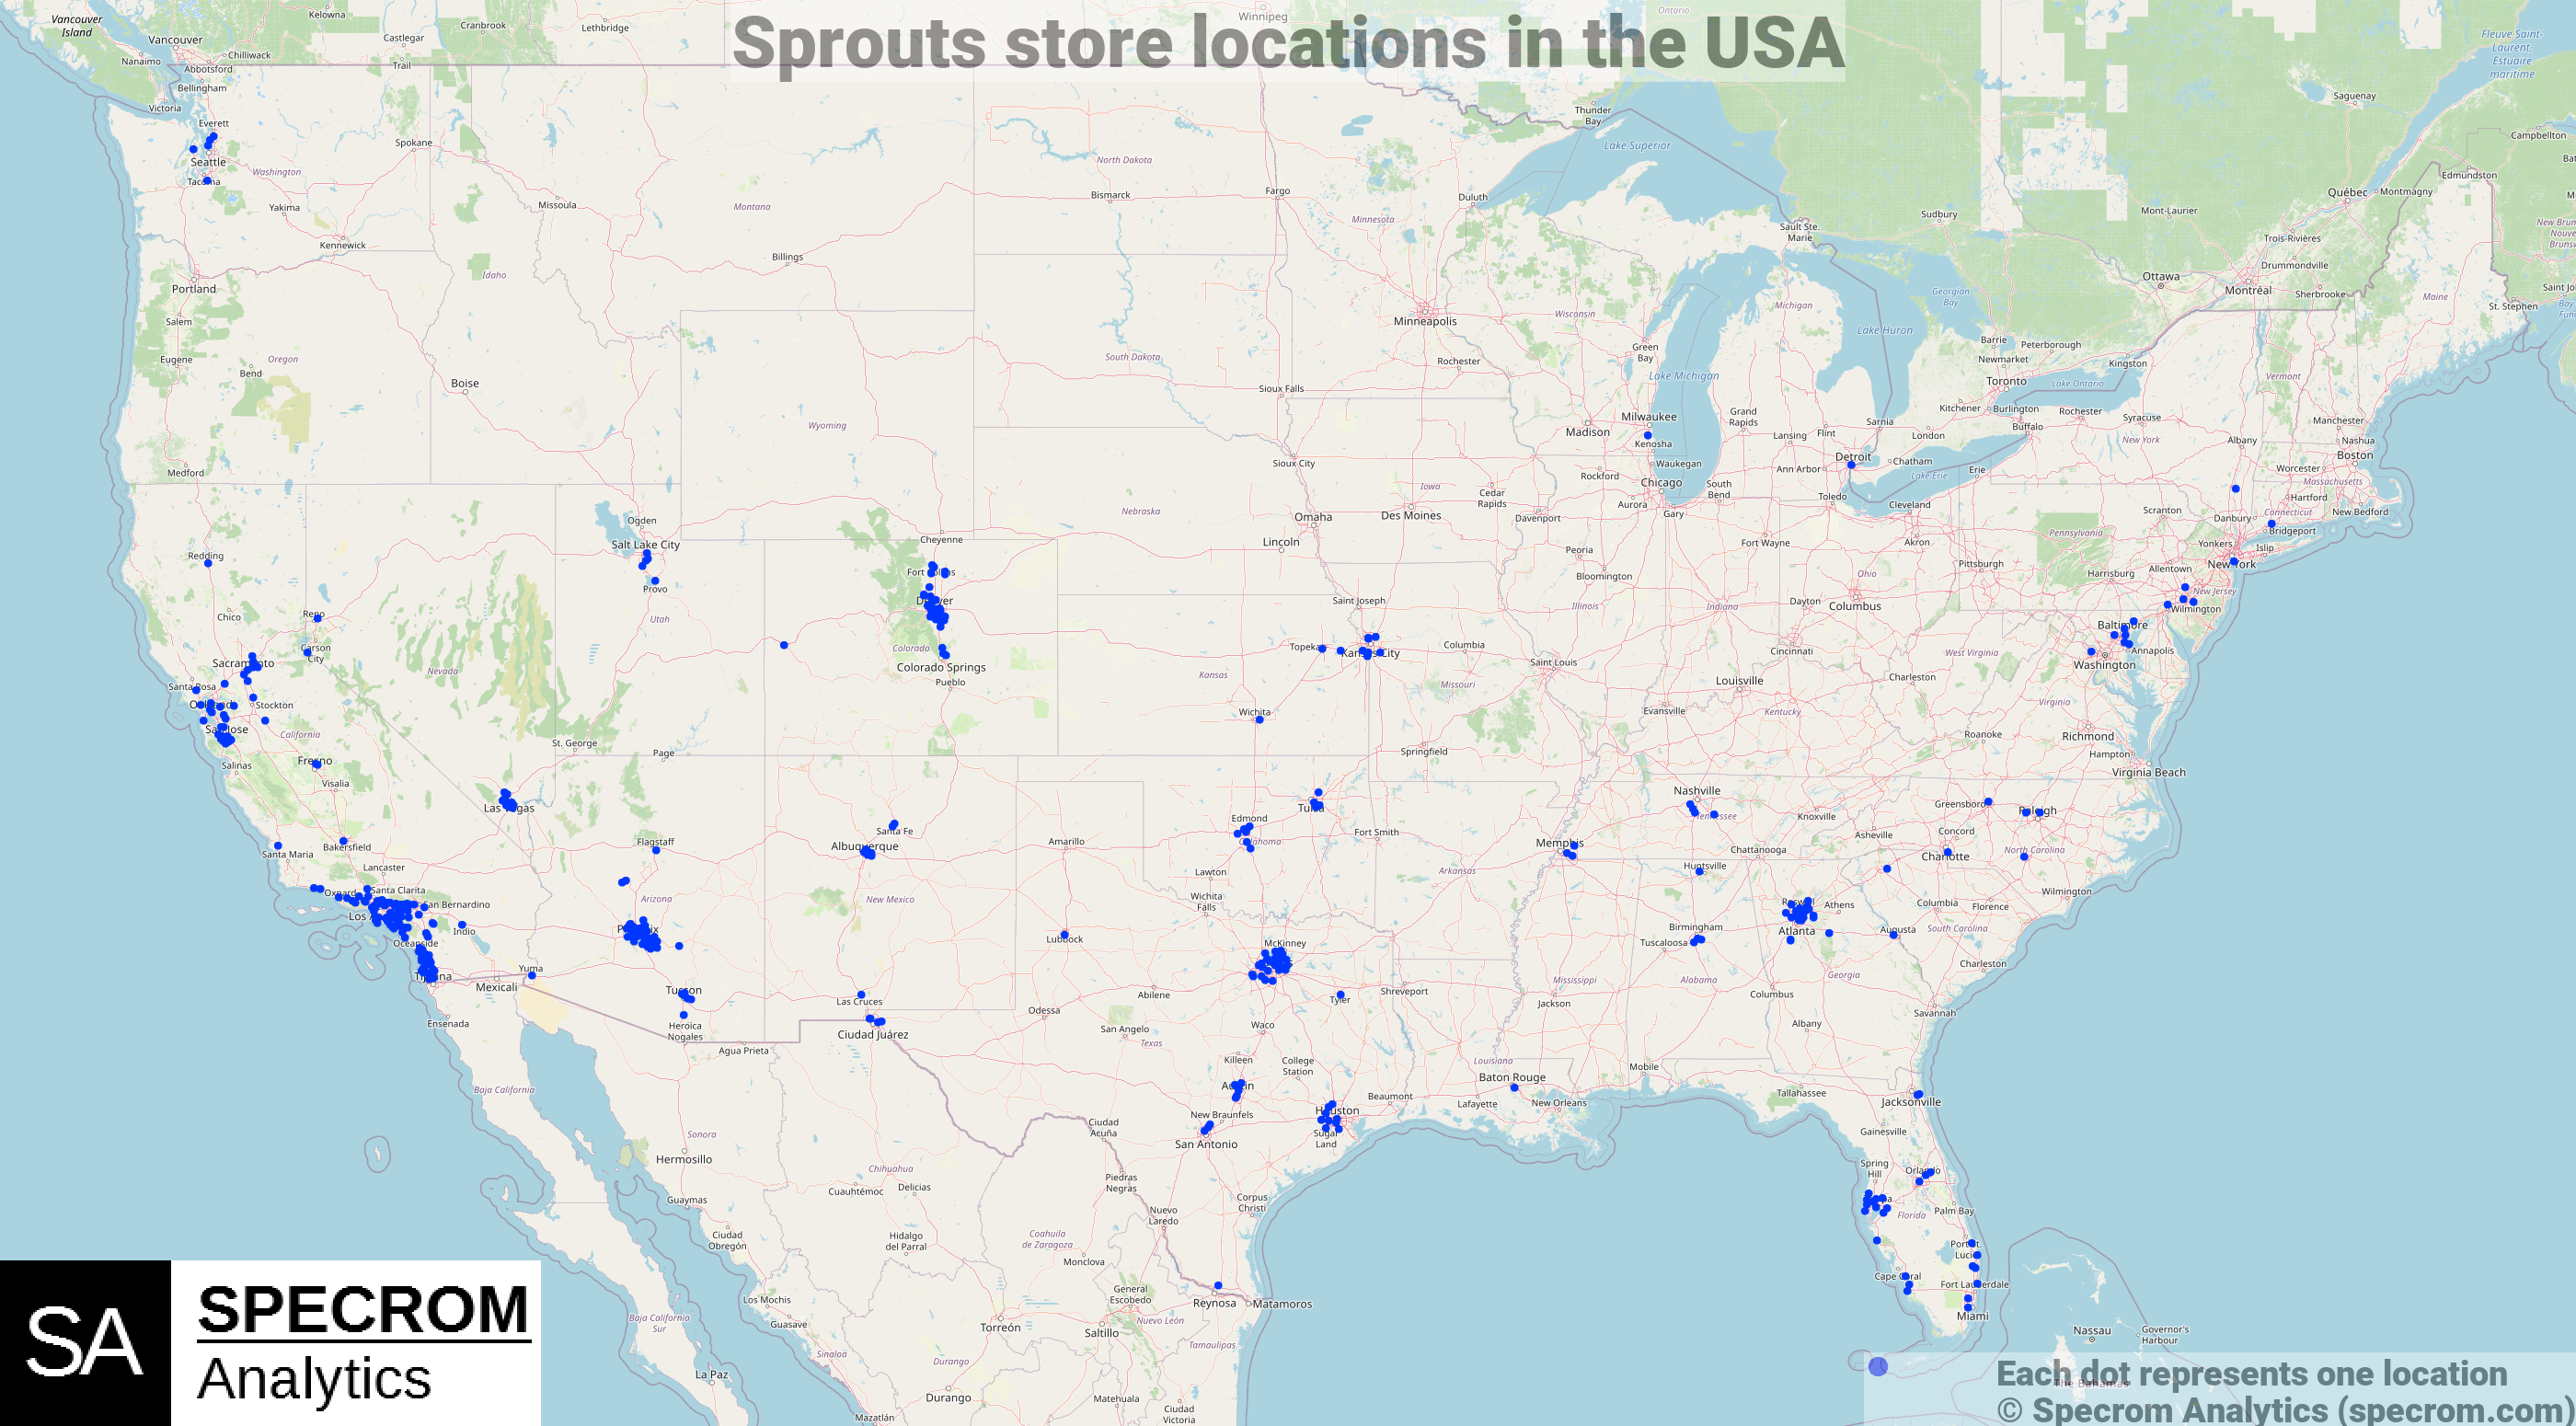 Sprouts store locations in the USA